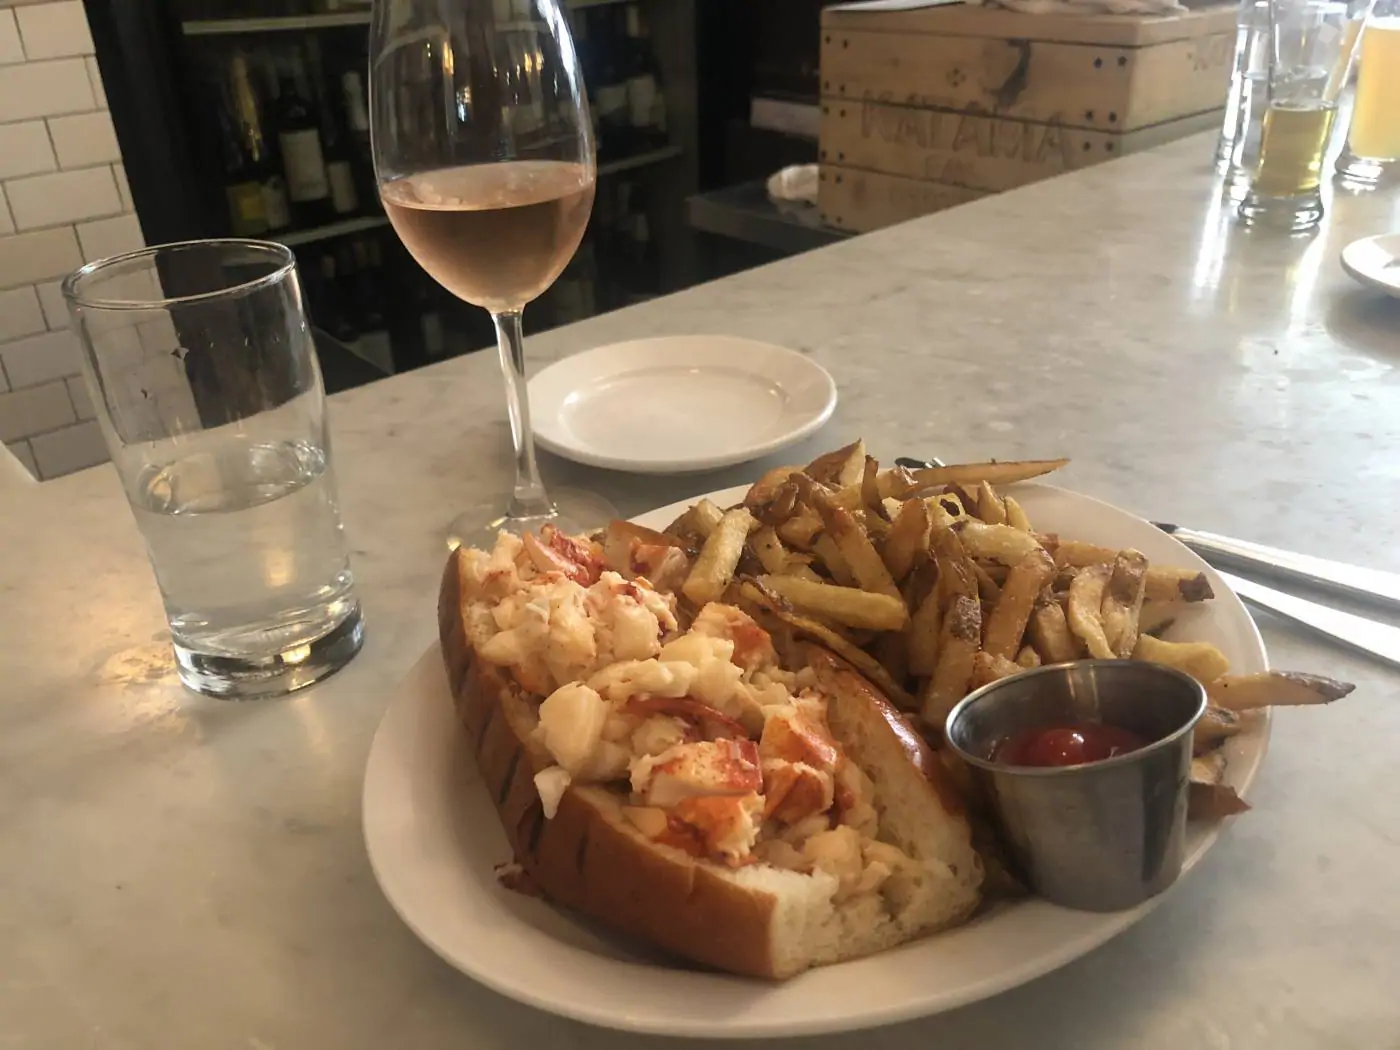 Get the Lobster Roll from Neptunes Oyster during your 24 hours in Boston